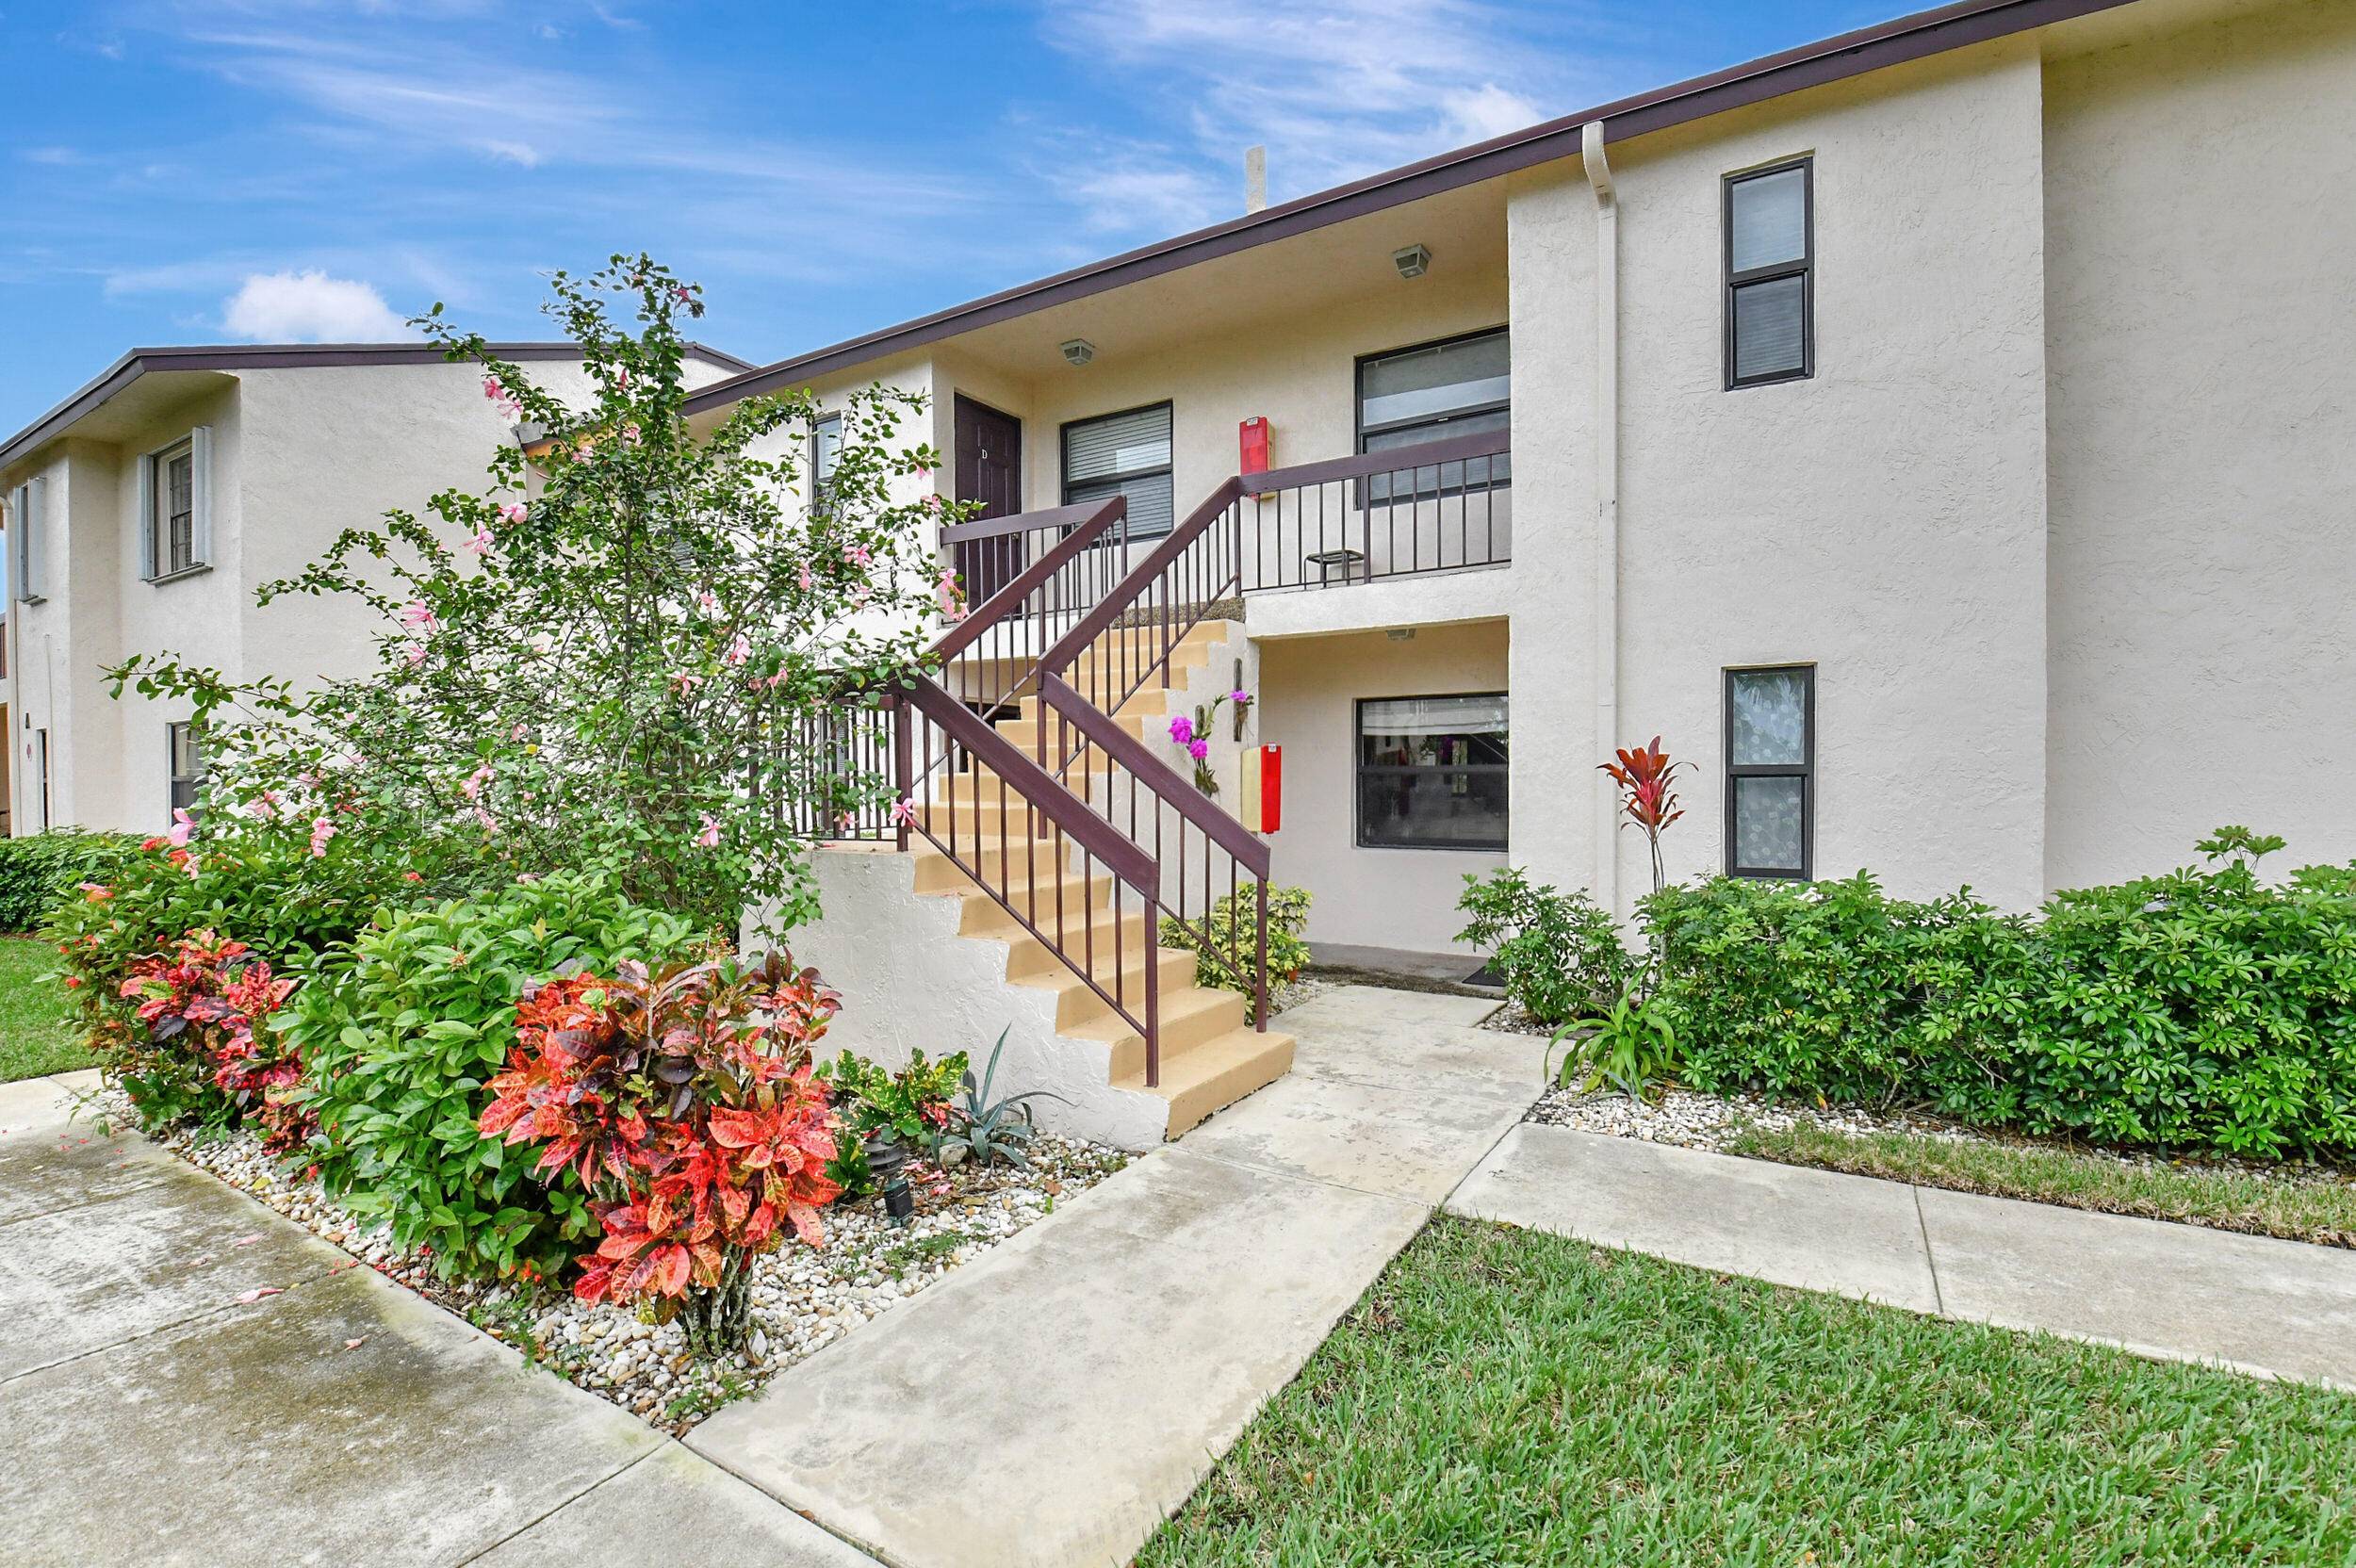 Welcome to 7911 Eastlake Drive, a ground floor 2 bed 2 bath condominium nestled in the serene Boca Lago Country Club, where membership is optional.